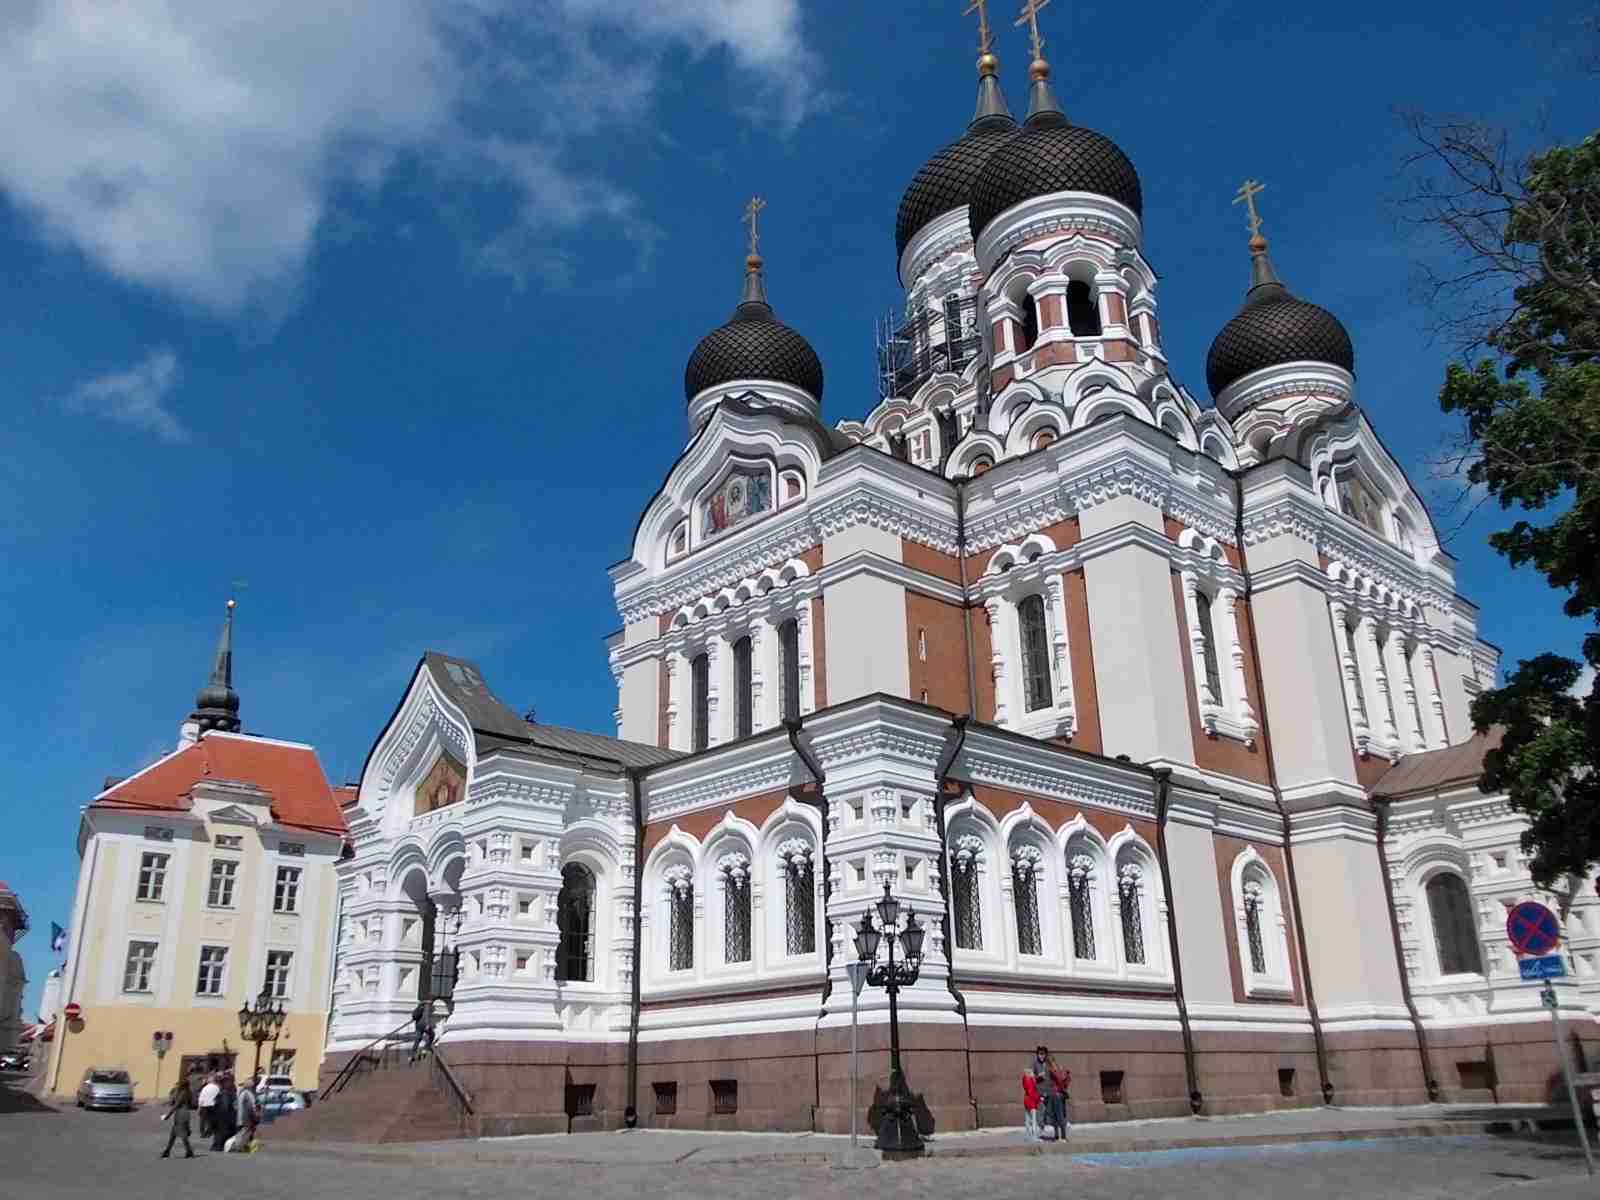 The orthodox cathedral in Tallinn